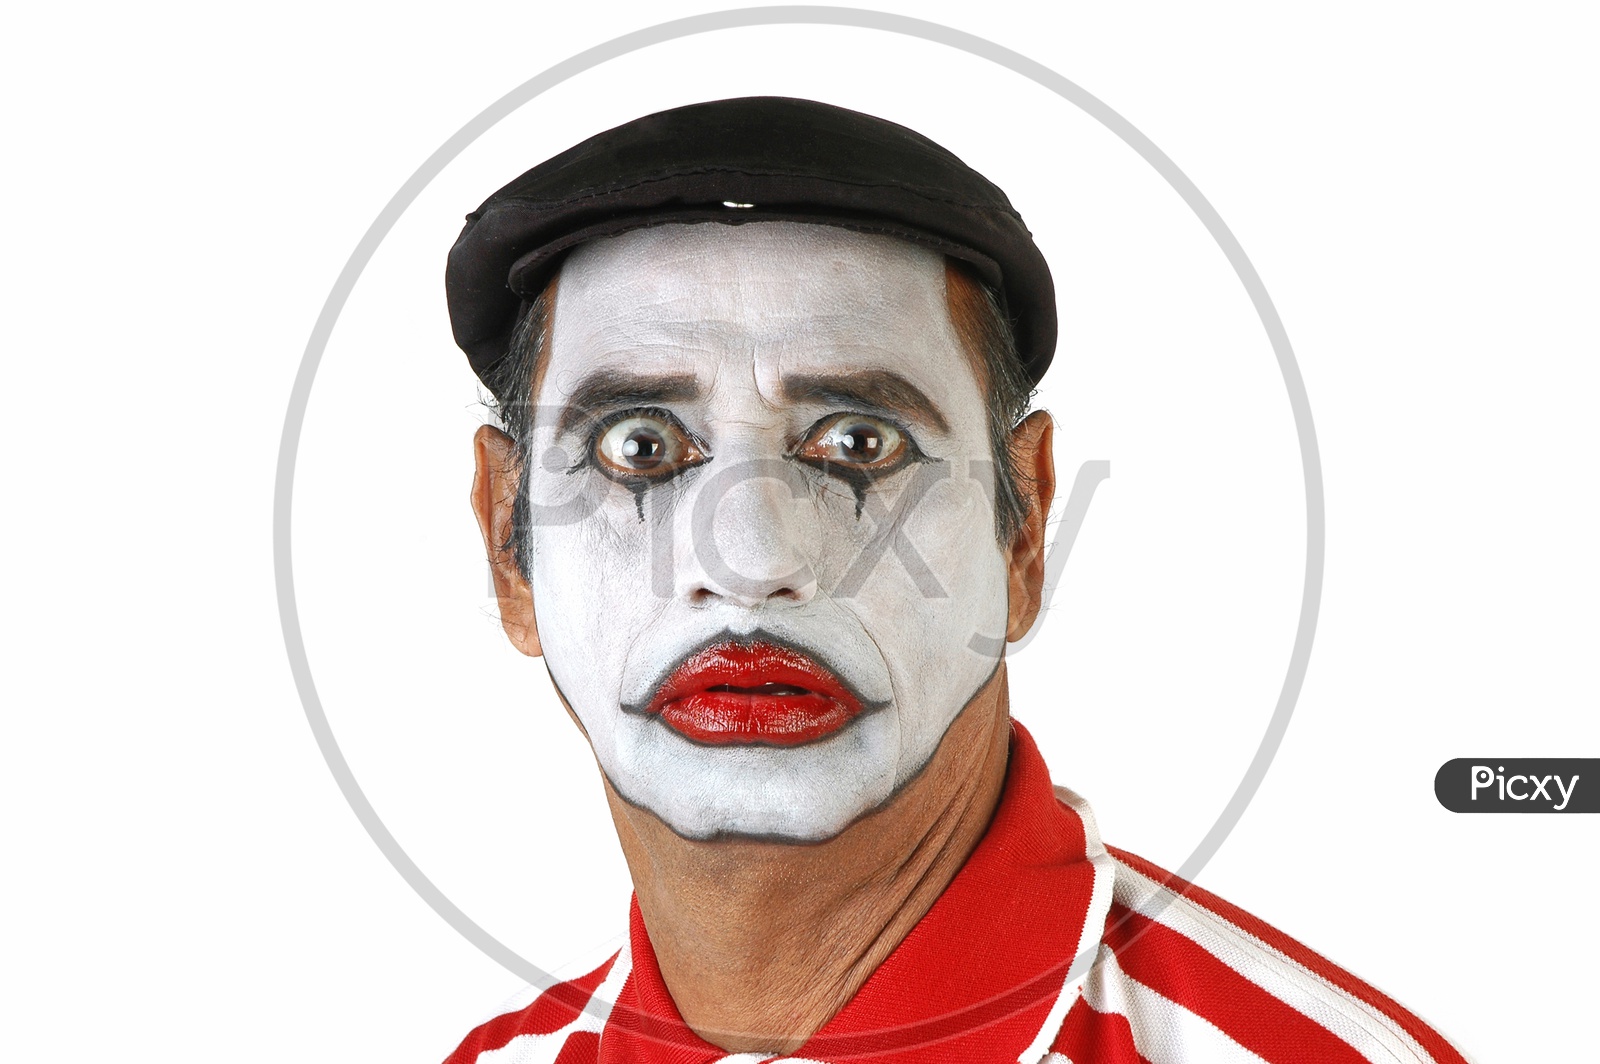 Mime Artist With Expressions